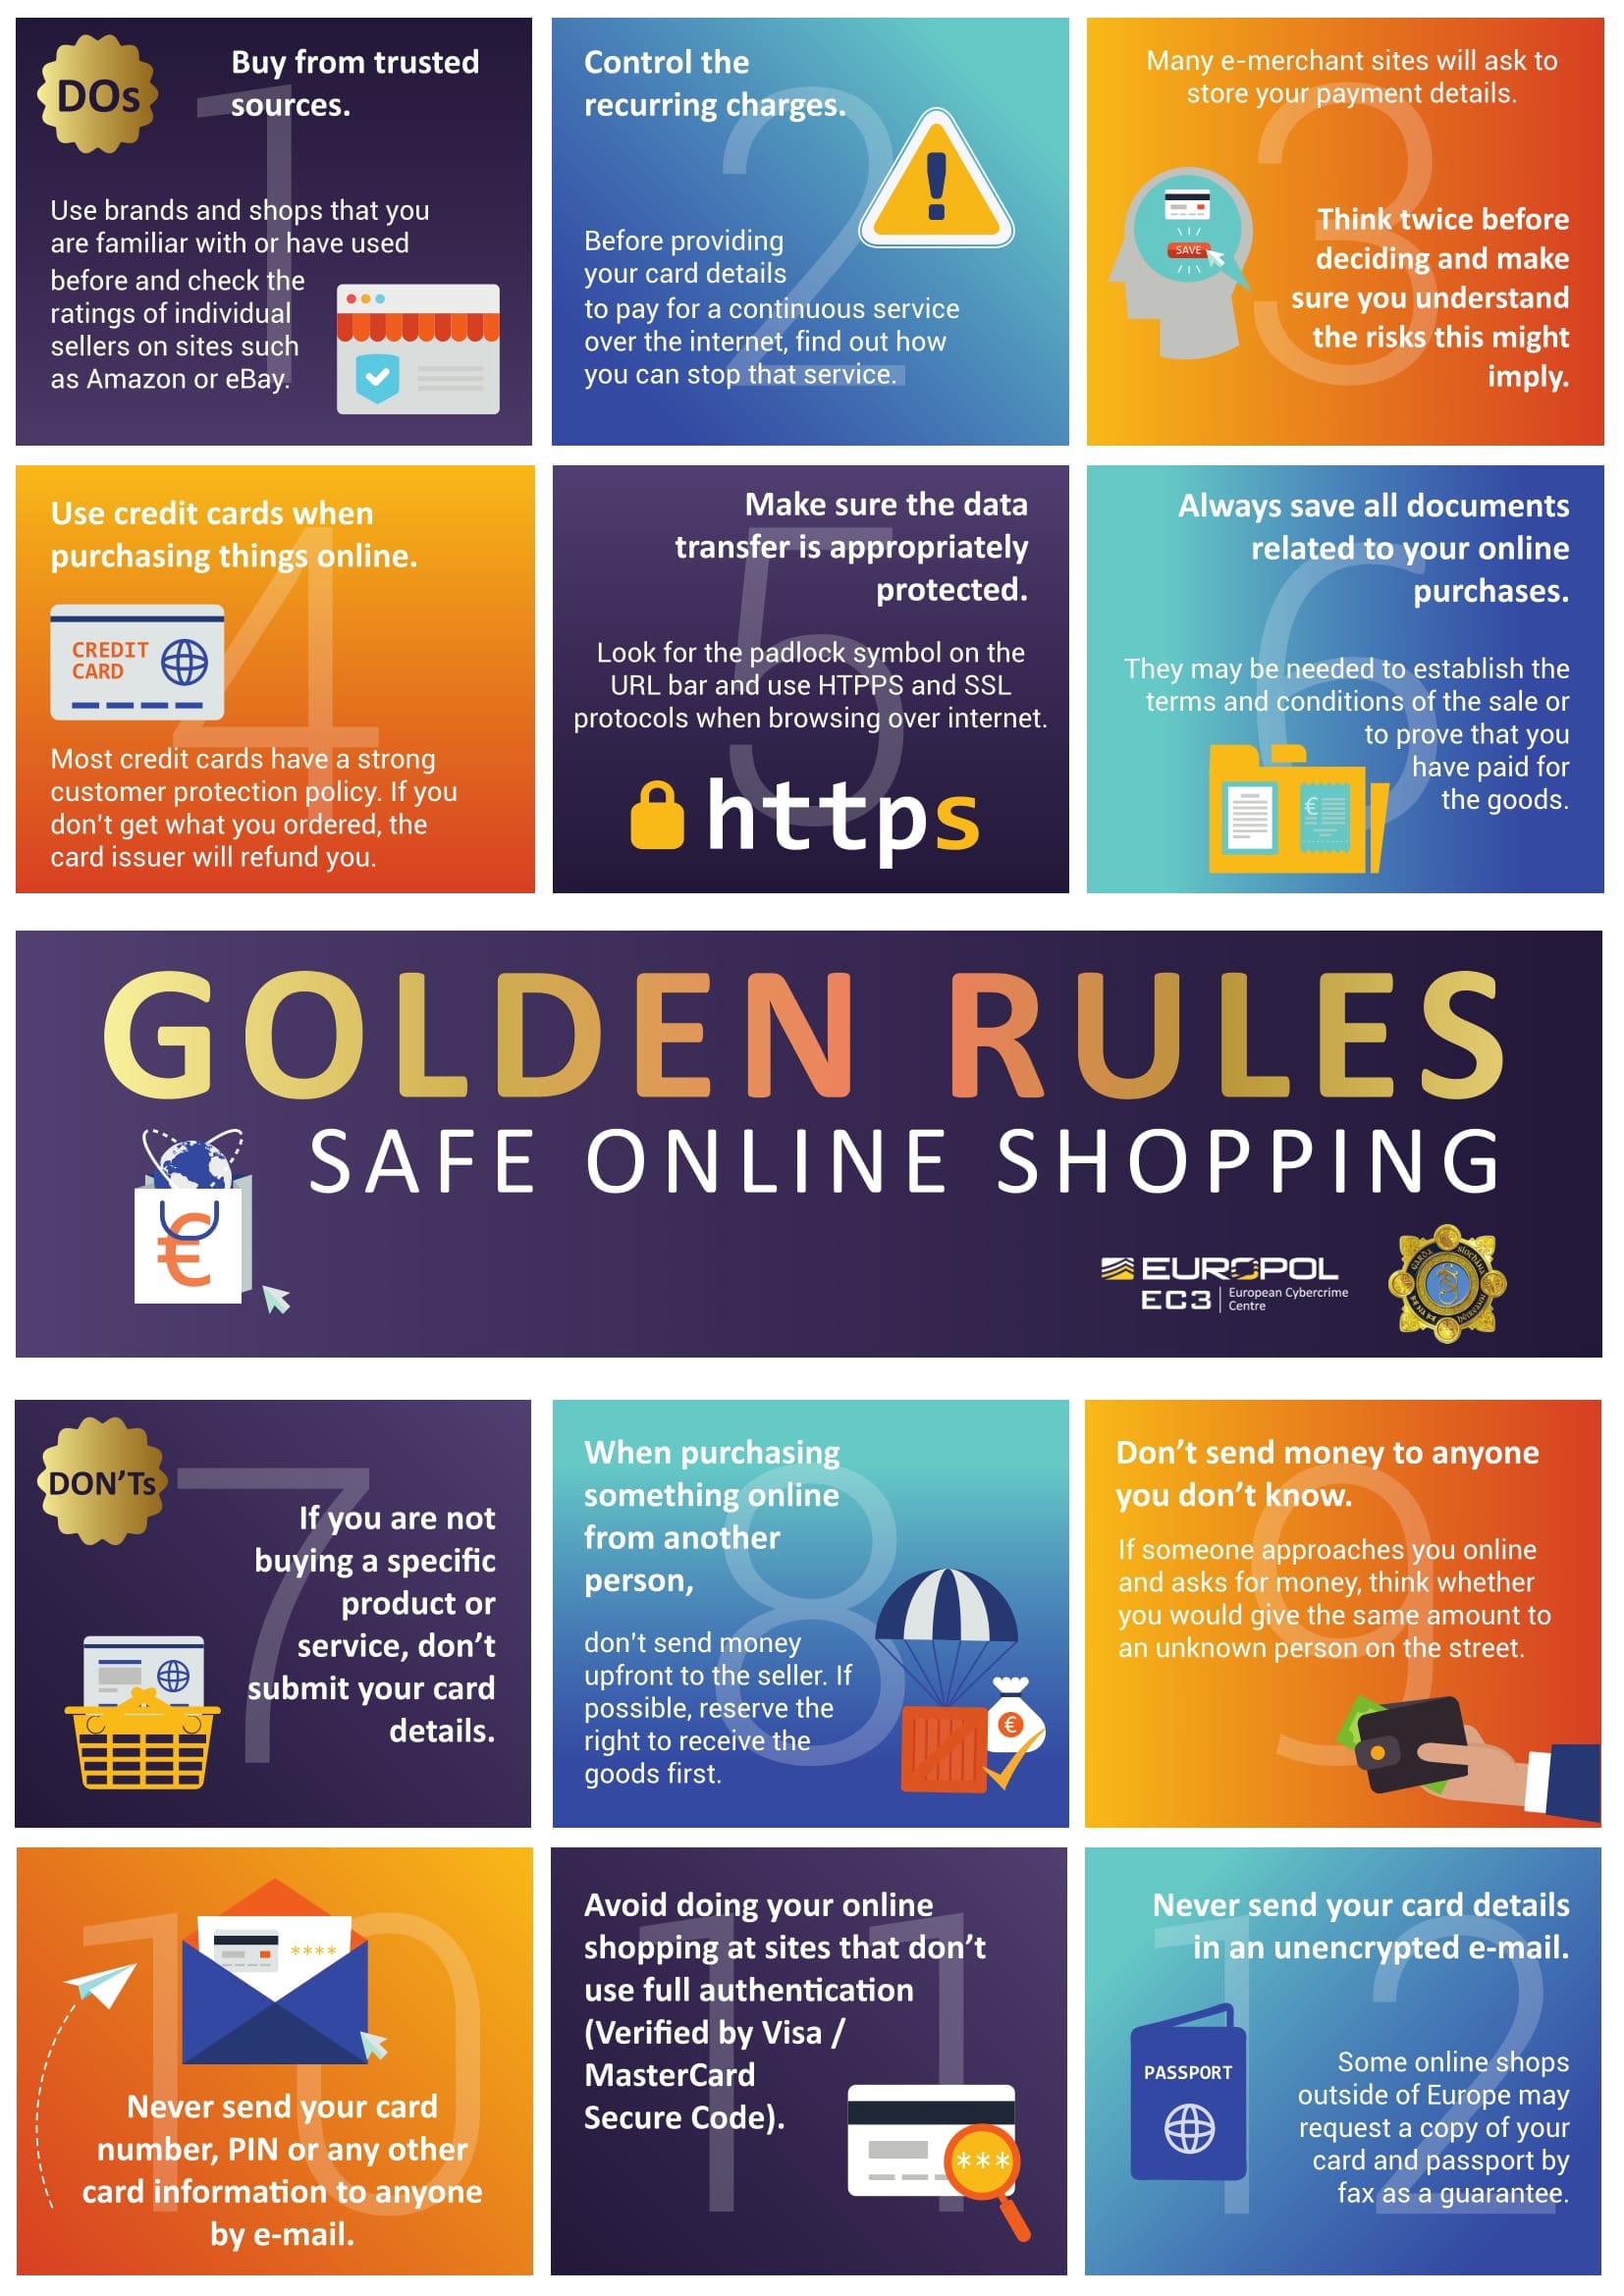 how to shop online safely essay